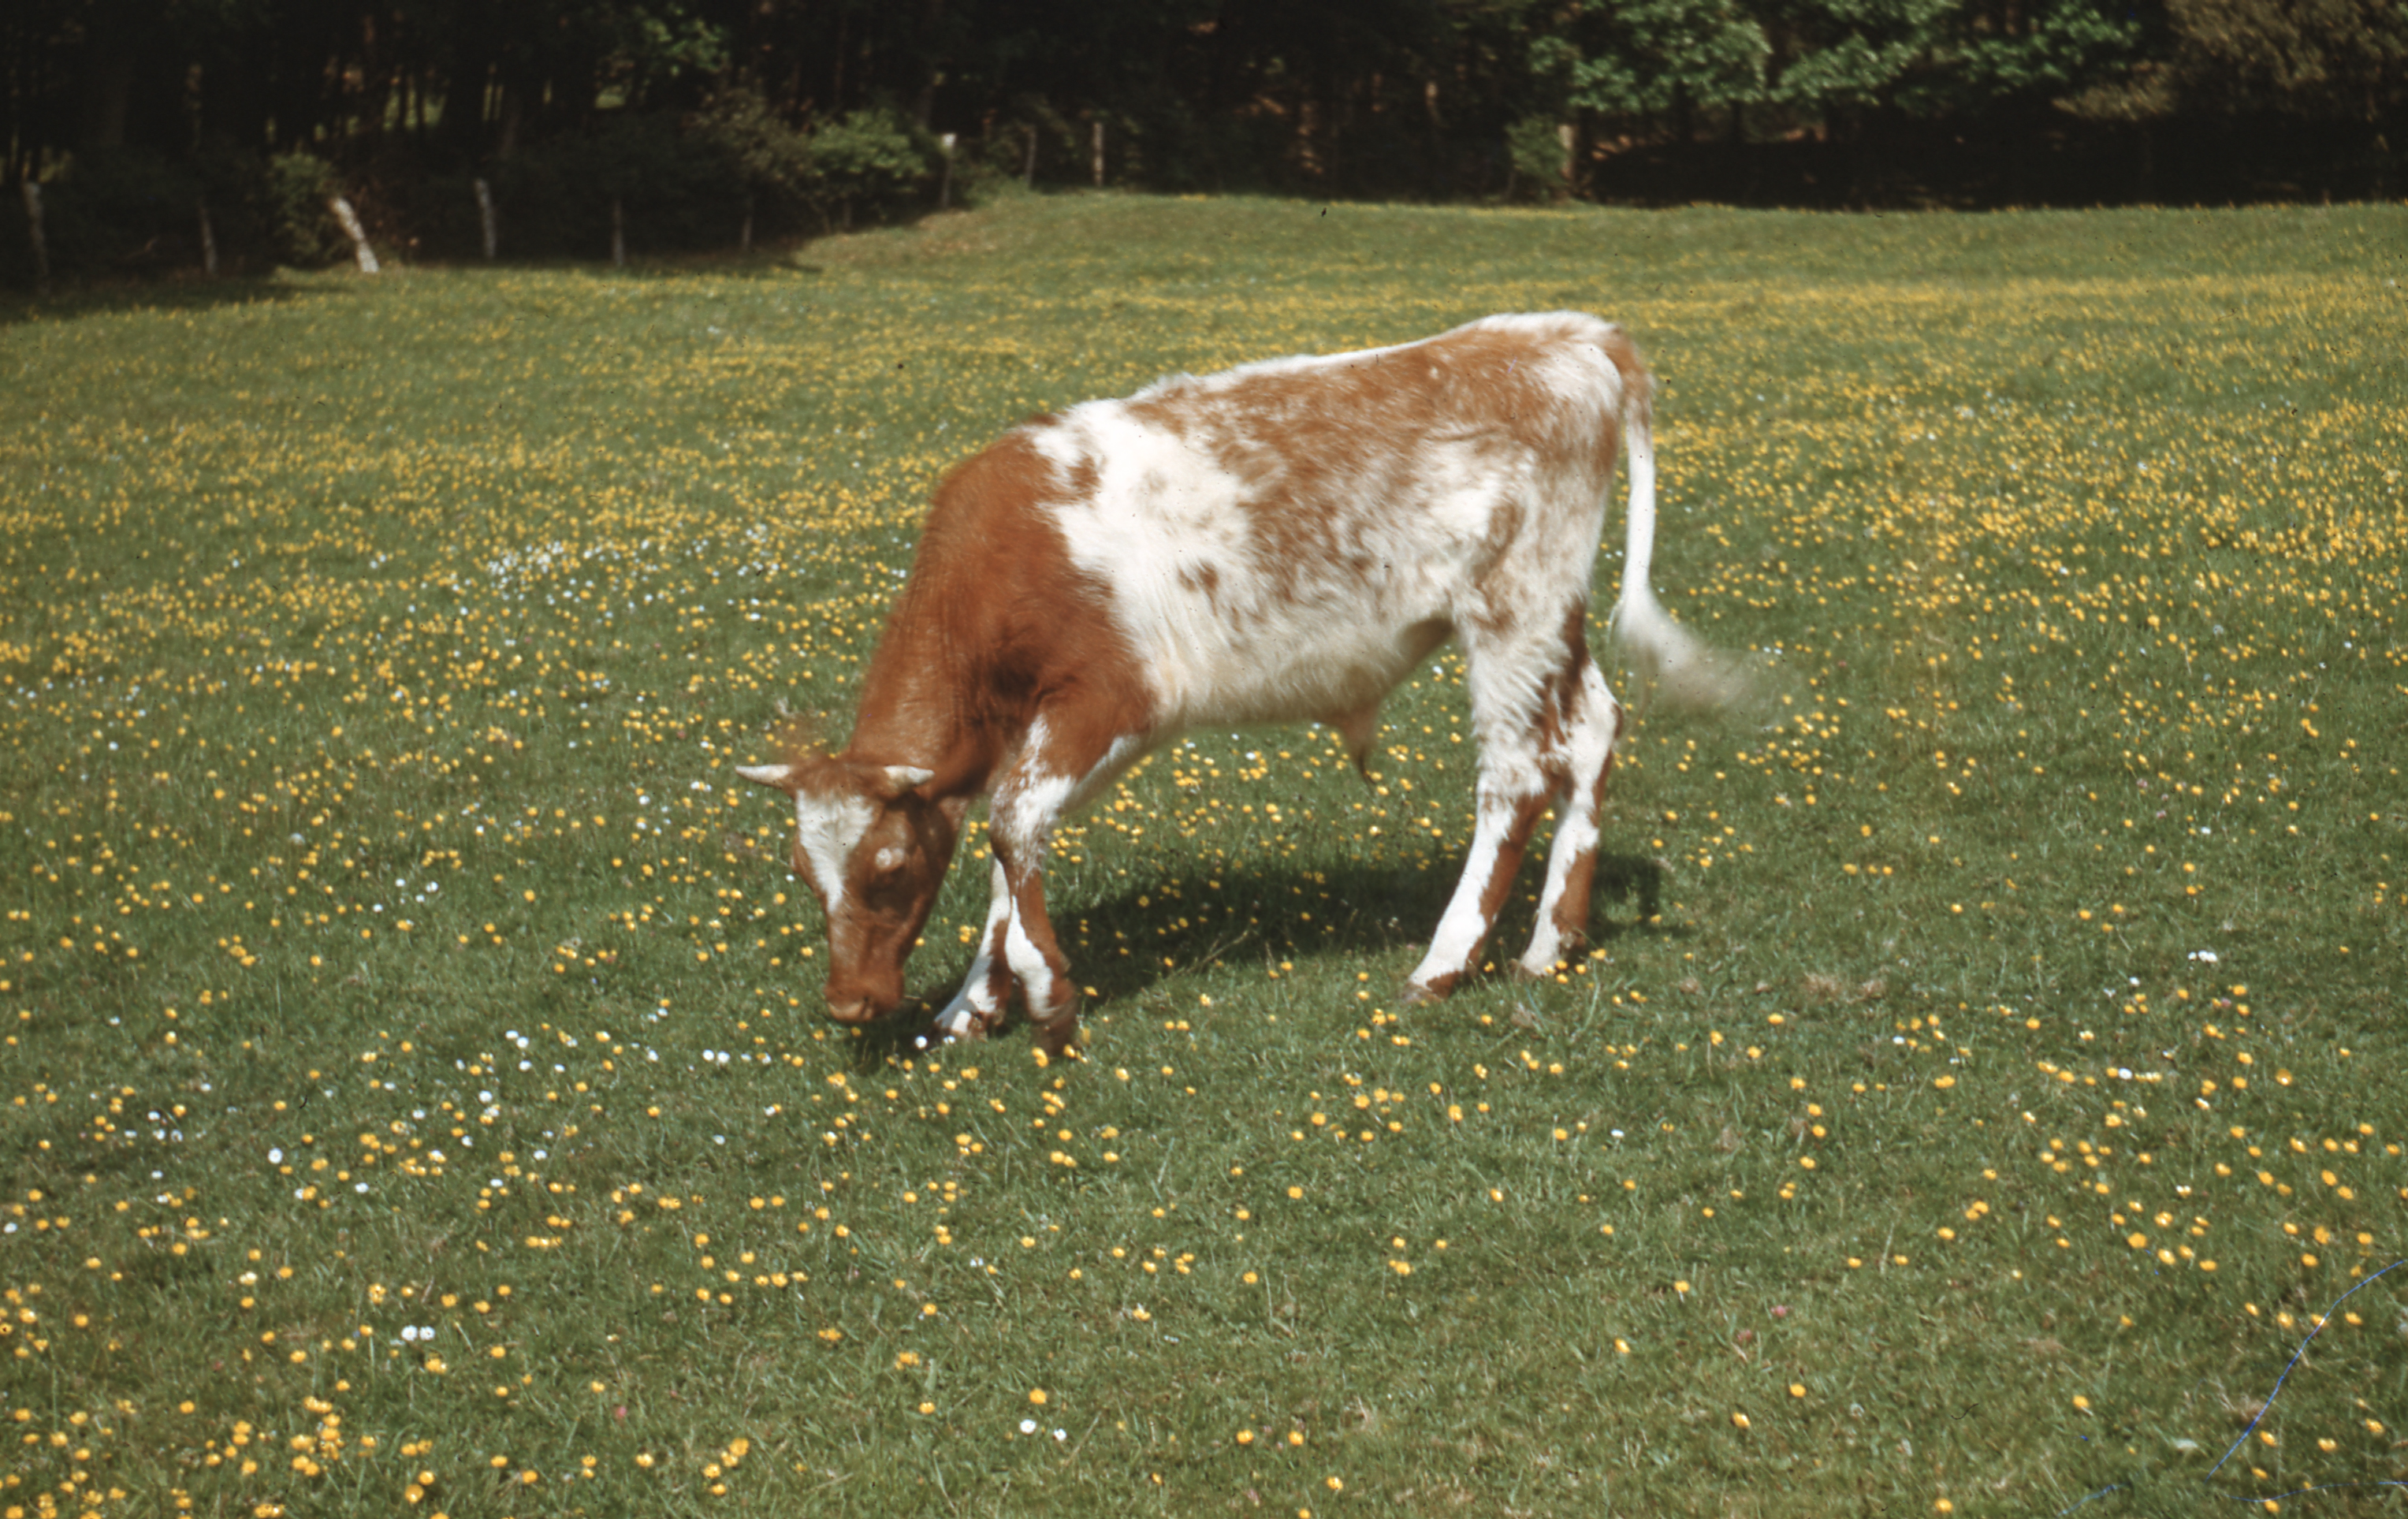 Brinded calf in the grass at St. Beuno's